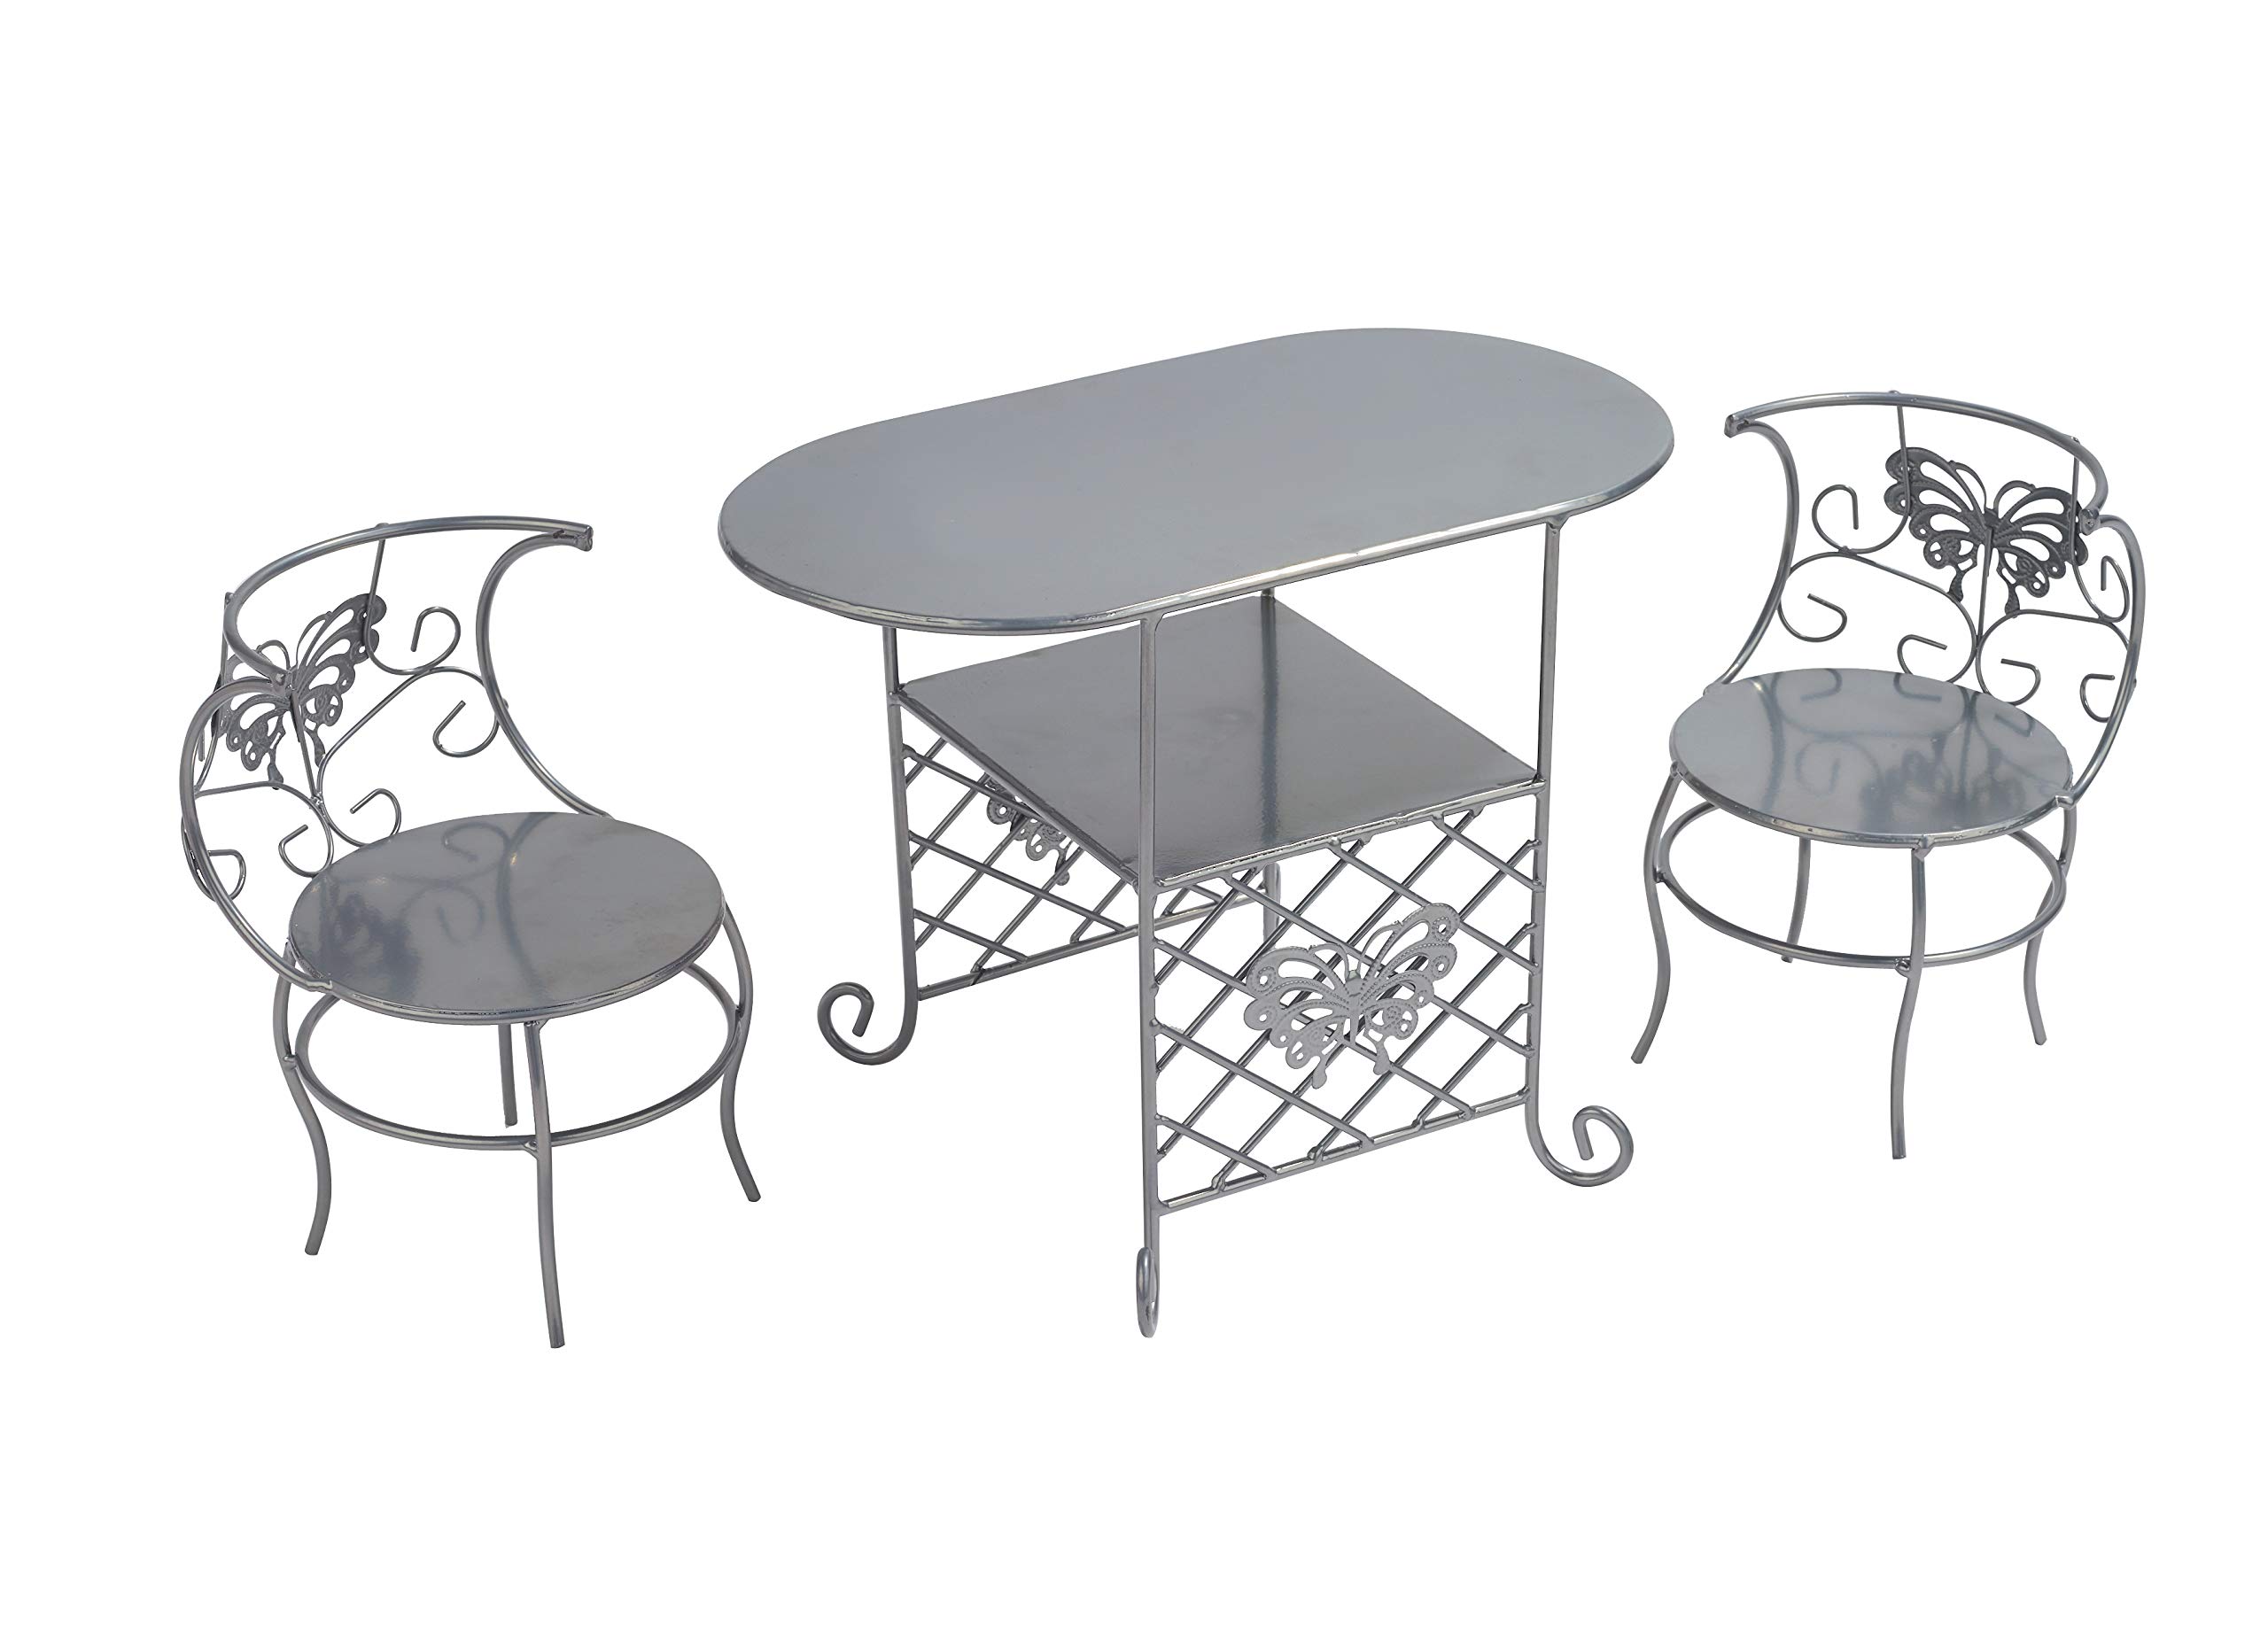 Badger Basket Tea Time Toy Metal Doll Table and Chair Set with Accessories for 18 inch Dolls - Silver/Pink/Multi